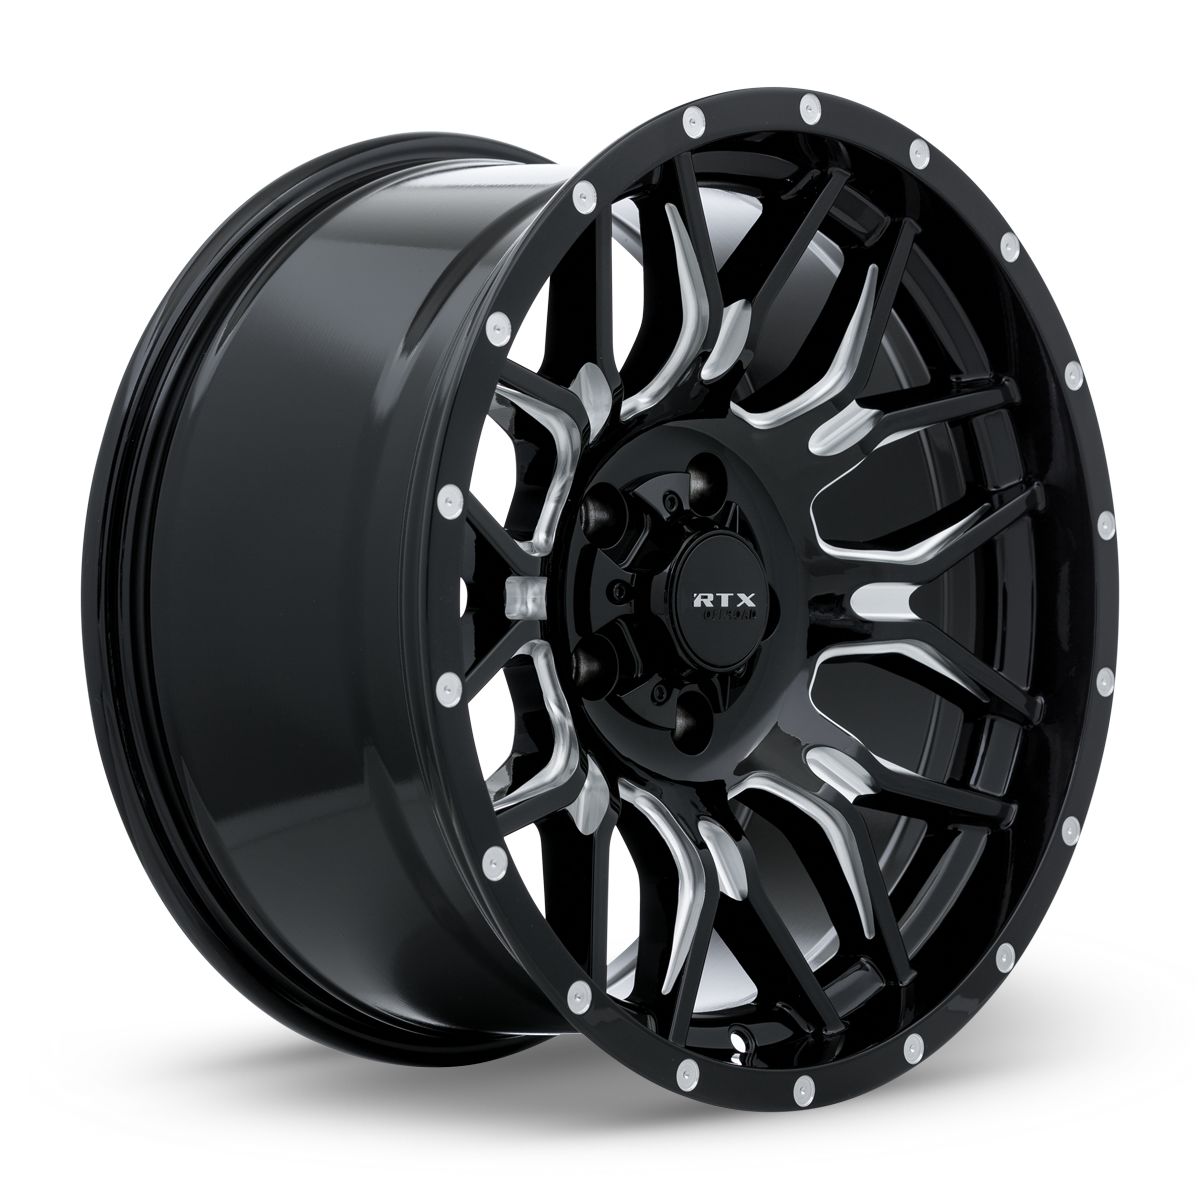 Claw • Gloss Black Milled with Rivets • 18x9 5x139.7 ET-12 CB78.1